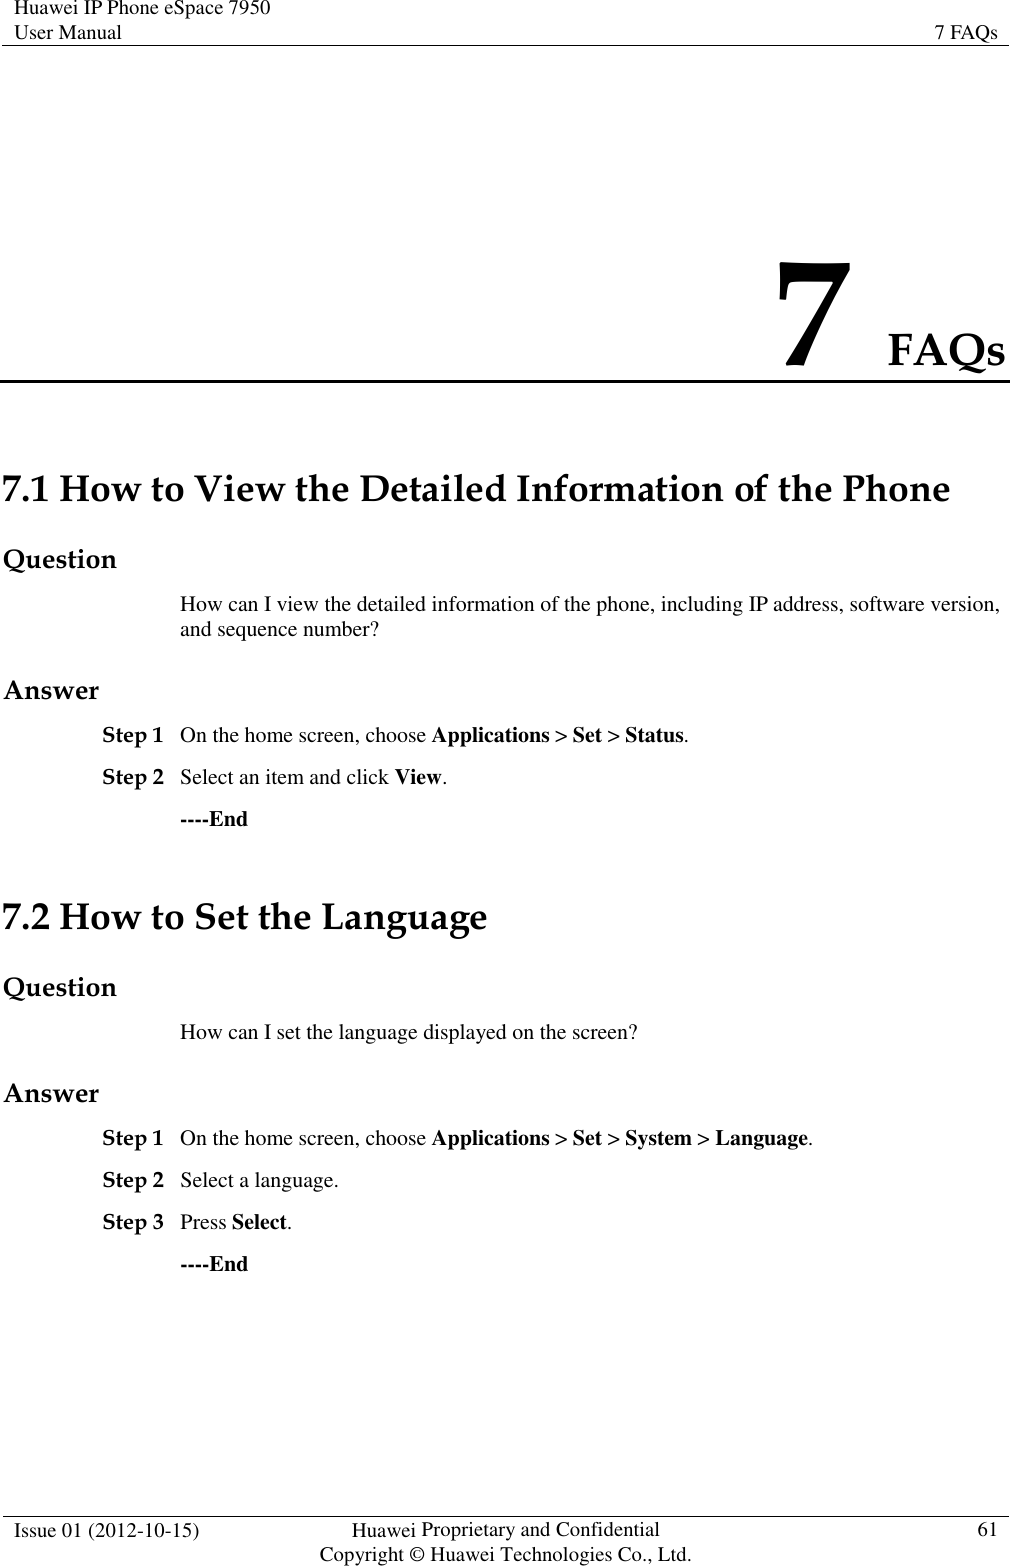 Huawei IP Phone eSpace 7950 User Manual  7 FAQs  Issue 01 (2012-10-15)  Huawei Proprietary and Confidential                 Copyright © Huawei Technologies Co., Ltd.  61  7 FAQs 7.1 How to View the Detailed Information of the Phone Question How can I view the detailed information of the phone, including IP address, software version, and sequence number? Answer Step 1 On the home screen, choose Applications &gt; Set &gt; Status. Step 2 Select an item and click View. ----End 7.2 How to Set the Language Question How can I set the language displayed on the screen? Answer Step 1 On the home screen, choose Applications &gt; Set &gt; System &gt; Language. Step 2 Select a language. Step 3 Press Select. ----End 